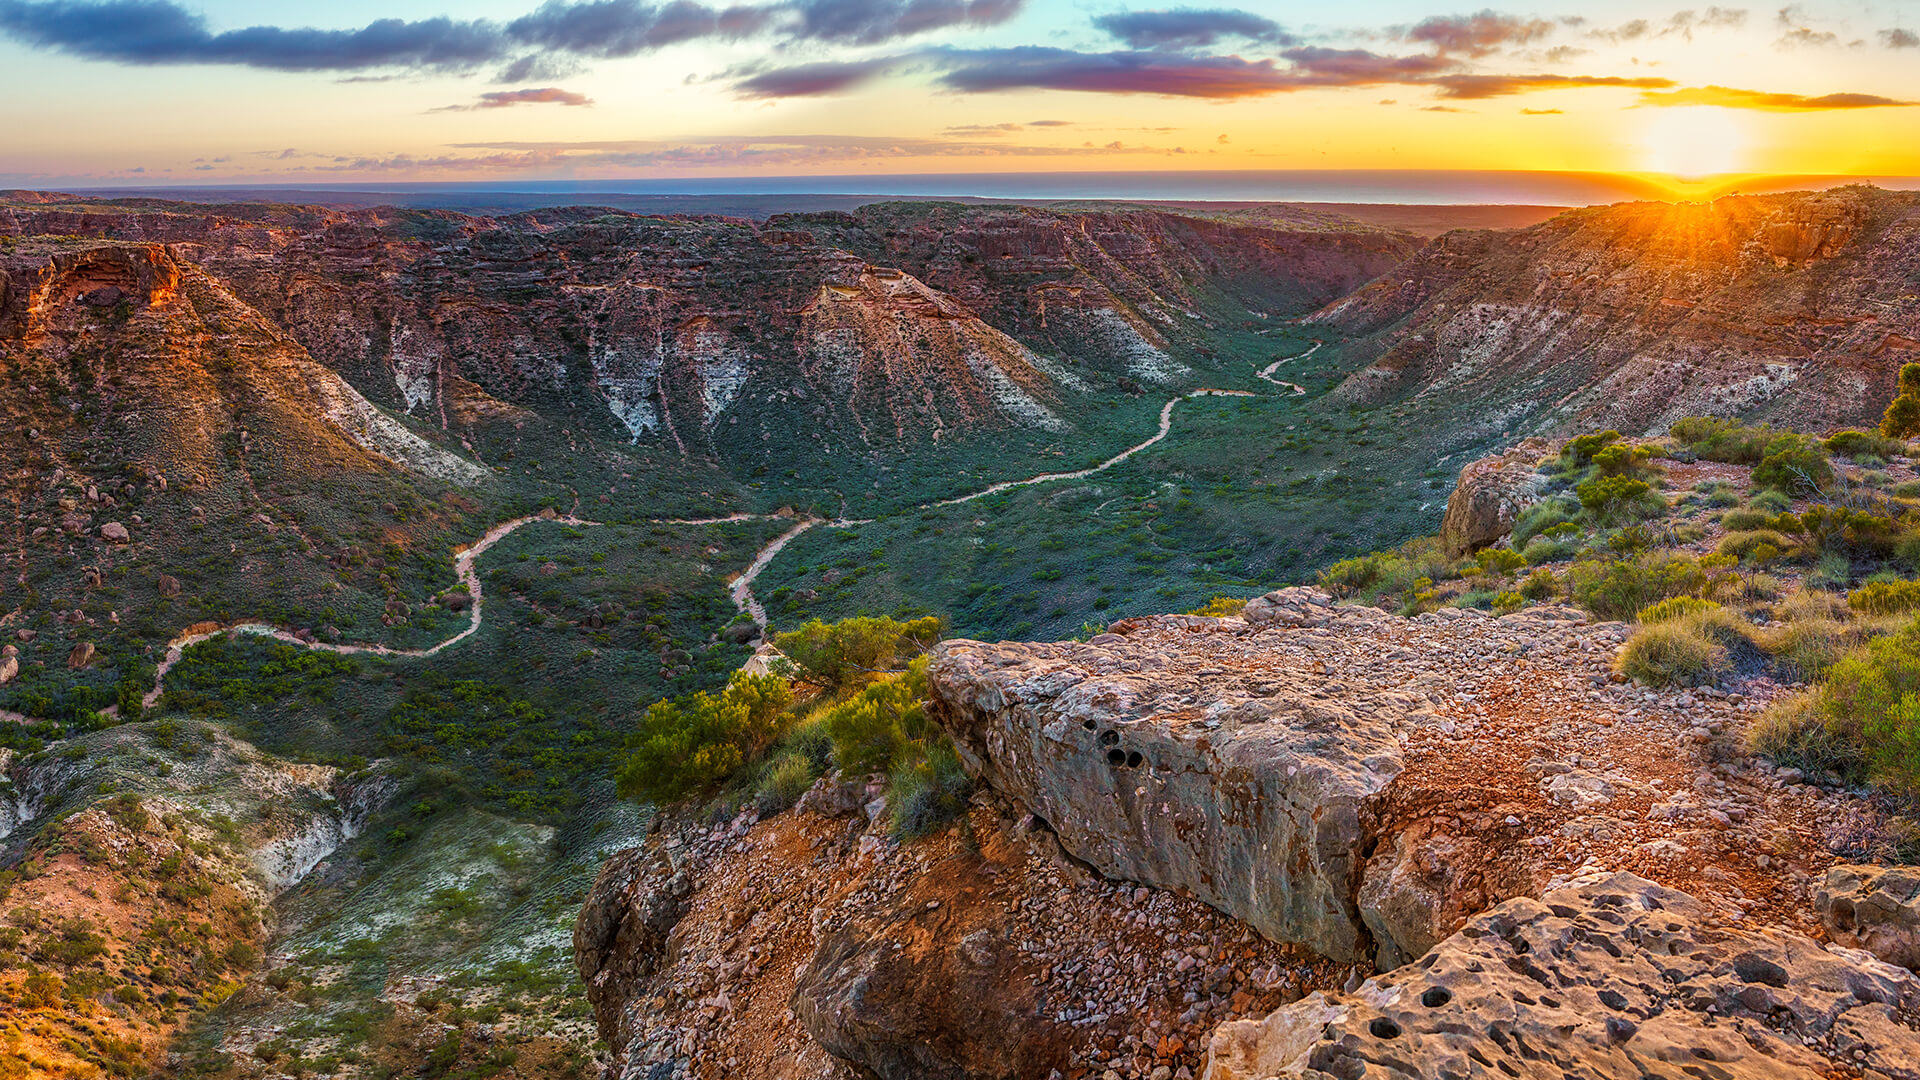 The WA NDIS Transition has begun - An aerial view of Charles Knife Canyon in Western Australia